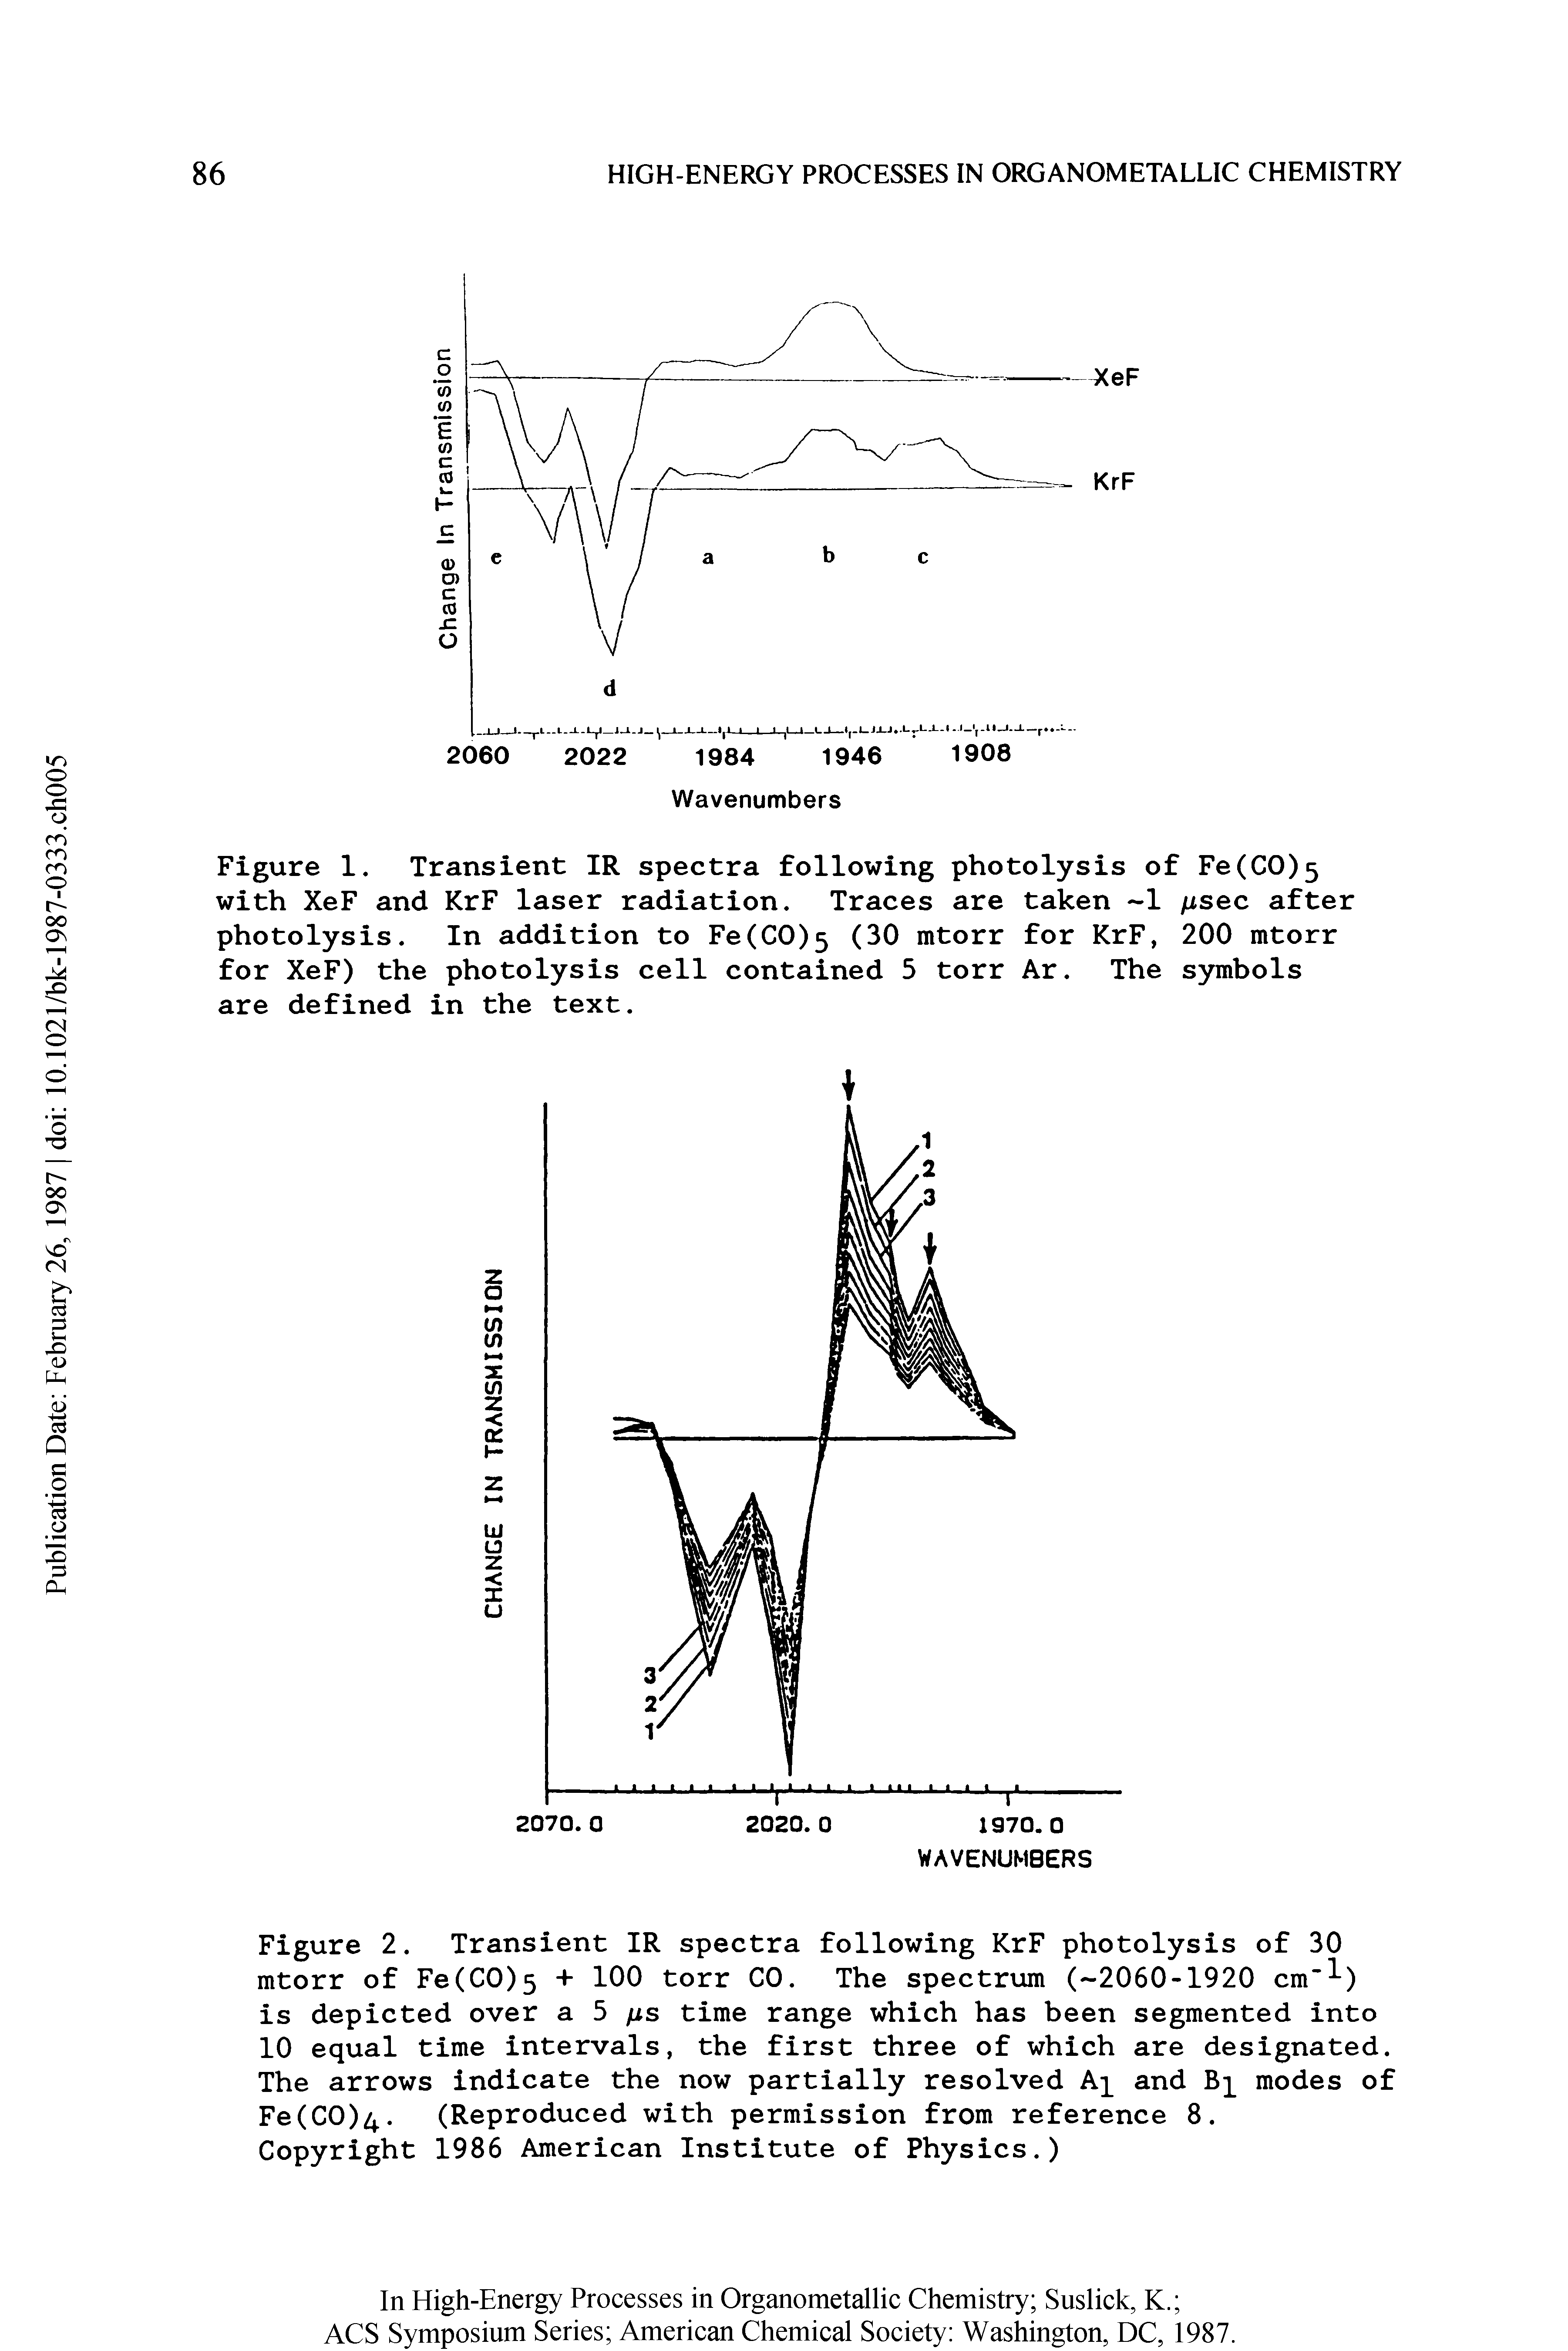 Figure 1. Transient IR spectra following photolysis of Fe(C0>5 with XeF and KrF laser radiation. Traces are taken -1 nsec after photolysis. In addition to Fe(C0>5 (30 mtorr for KrF, 200 mtorr for XeF) the photolysis cell contained 5 torr Ar. The symbols are defined in the text.